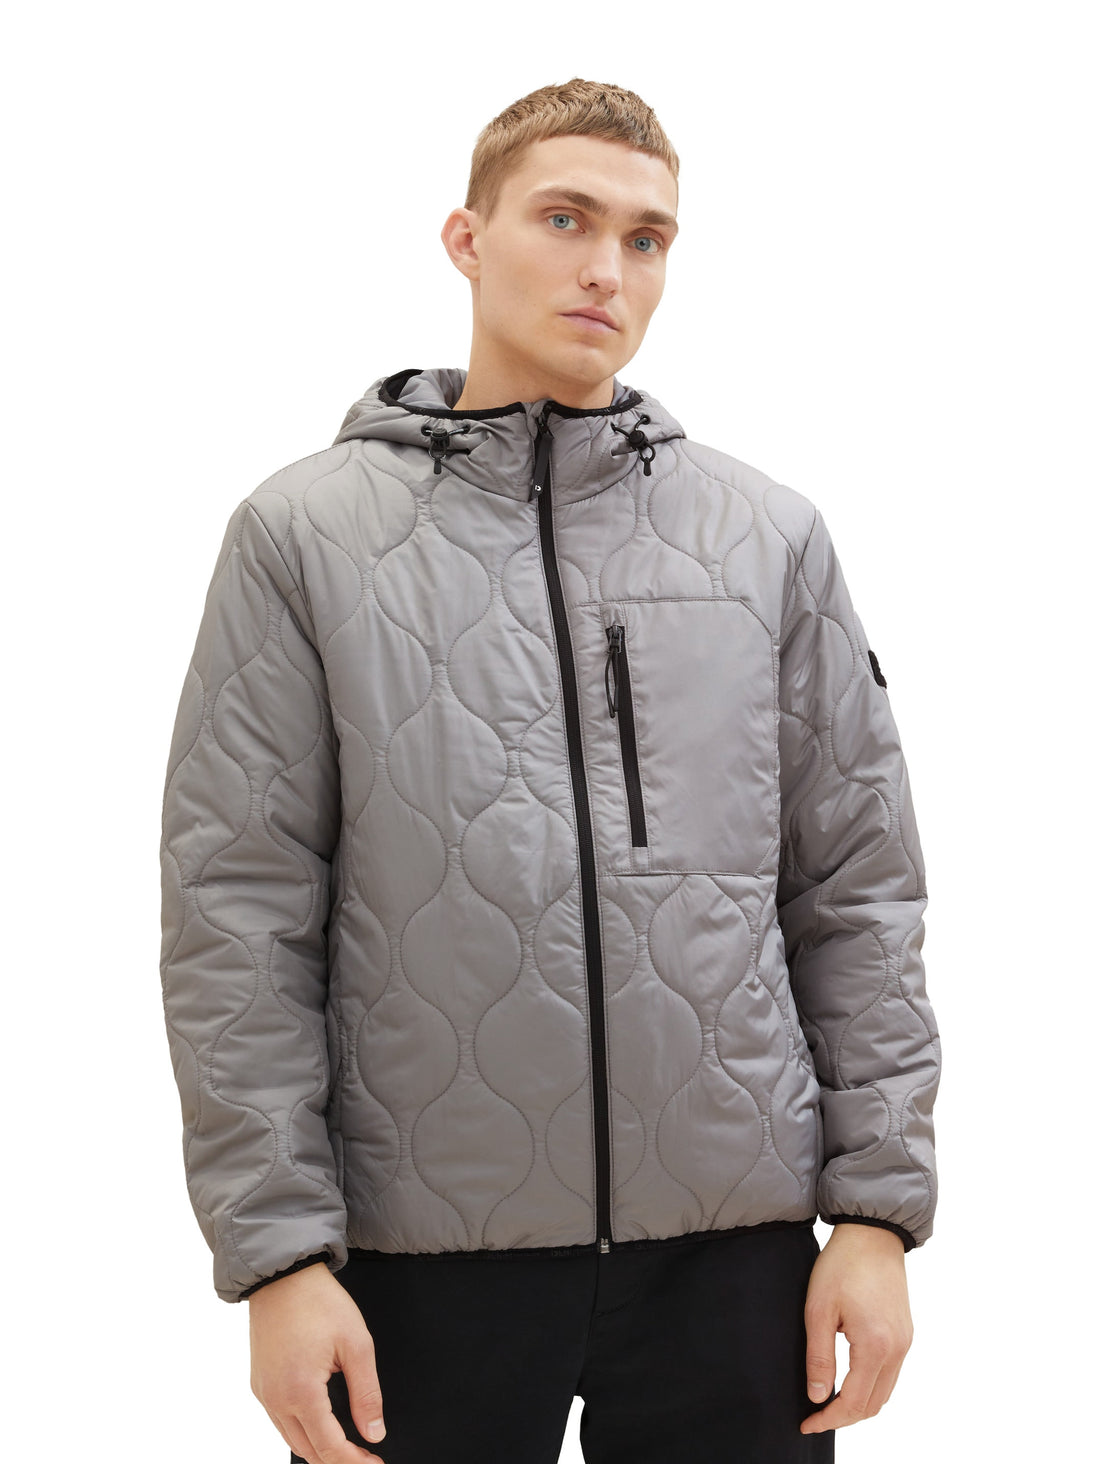 Quilted Puffer Light Weight Jacket_1036187_30902_05